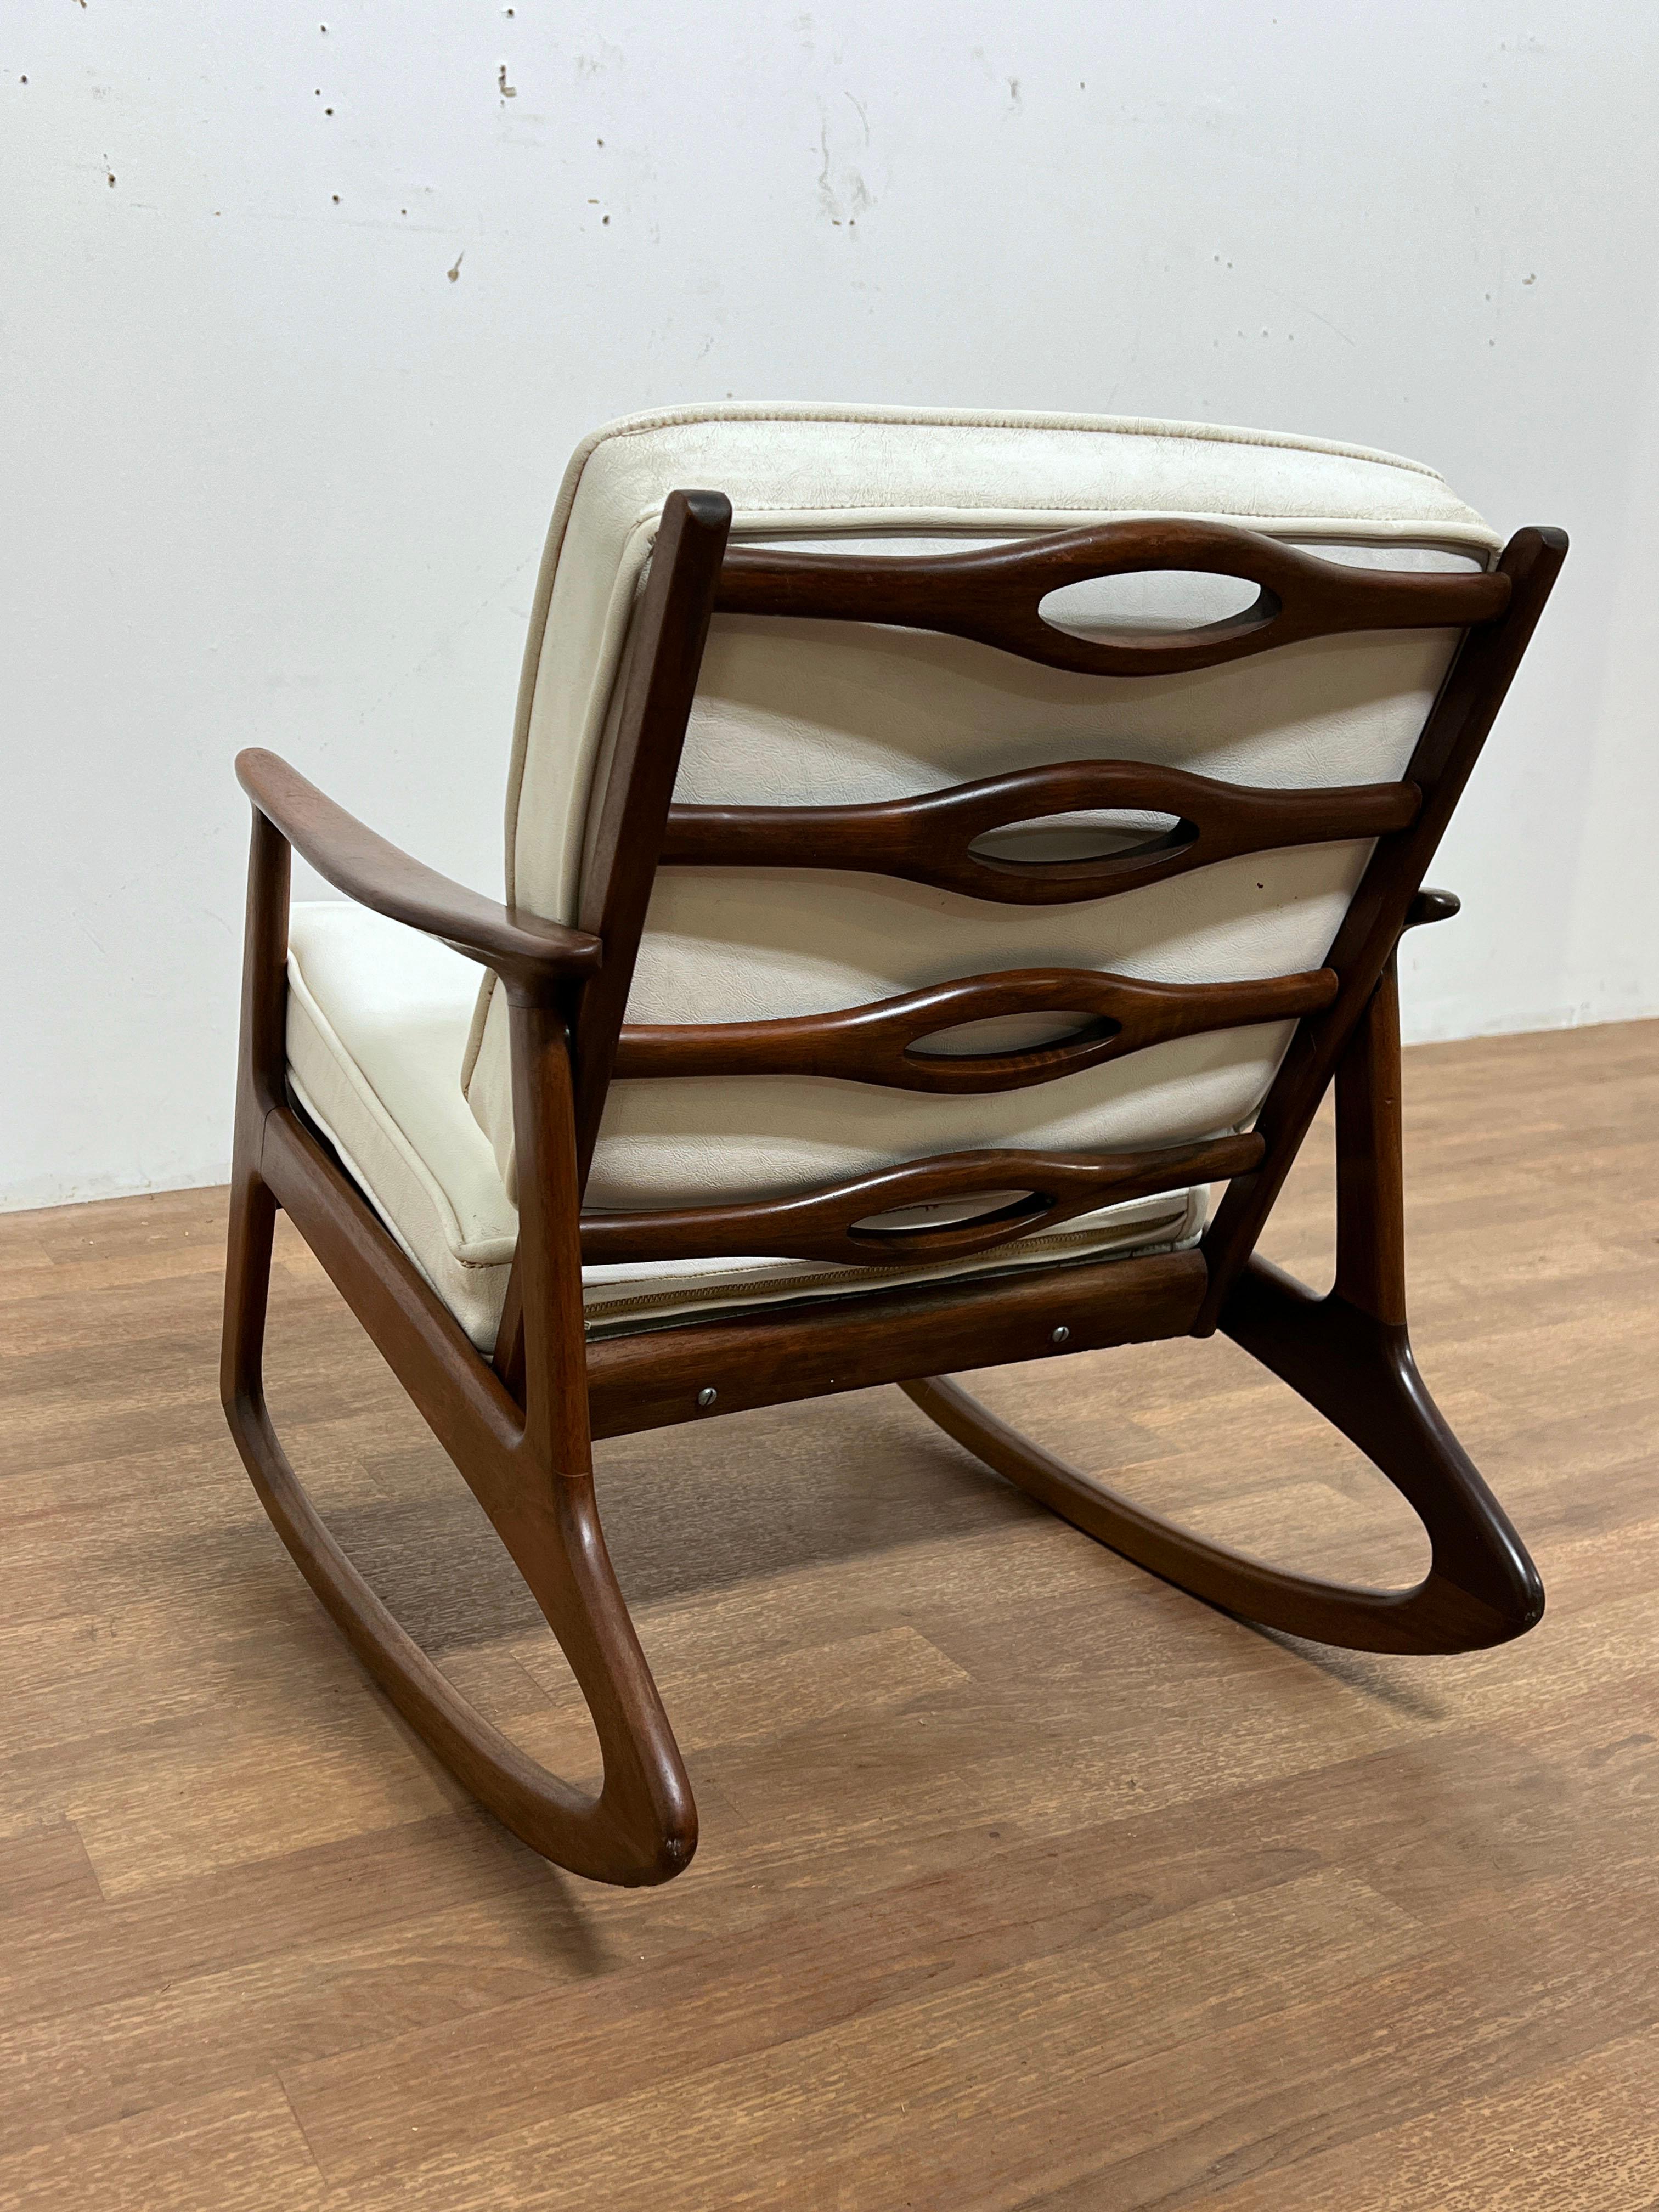 A rare child size rocker in teak, unmarked, but remarkably fine craftsmanship. Prior owners recall their parents brought this home in a box from a  trip to Copenhagen, Denmark, in the early 1960s.